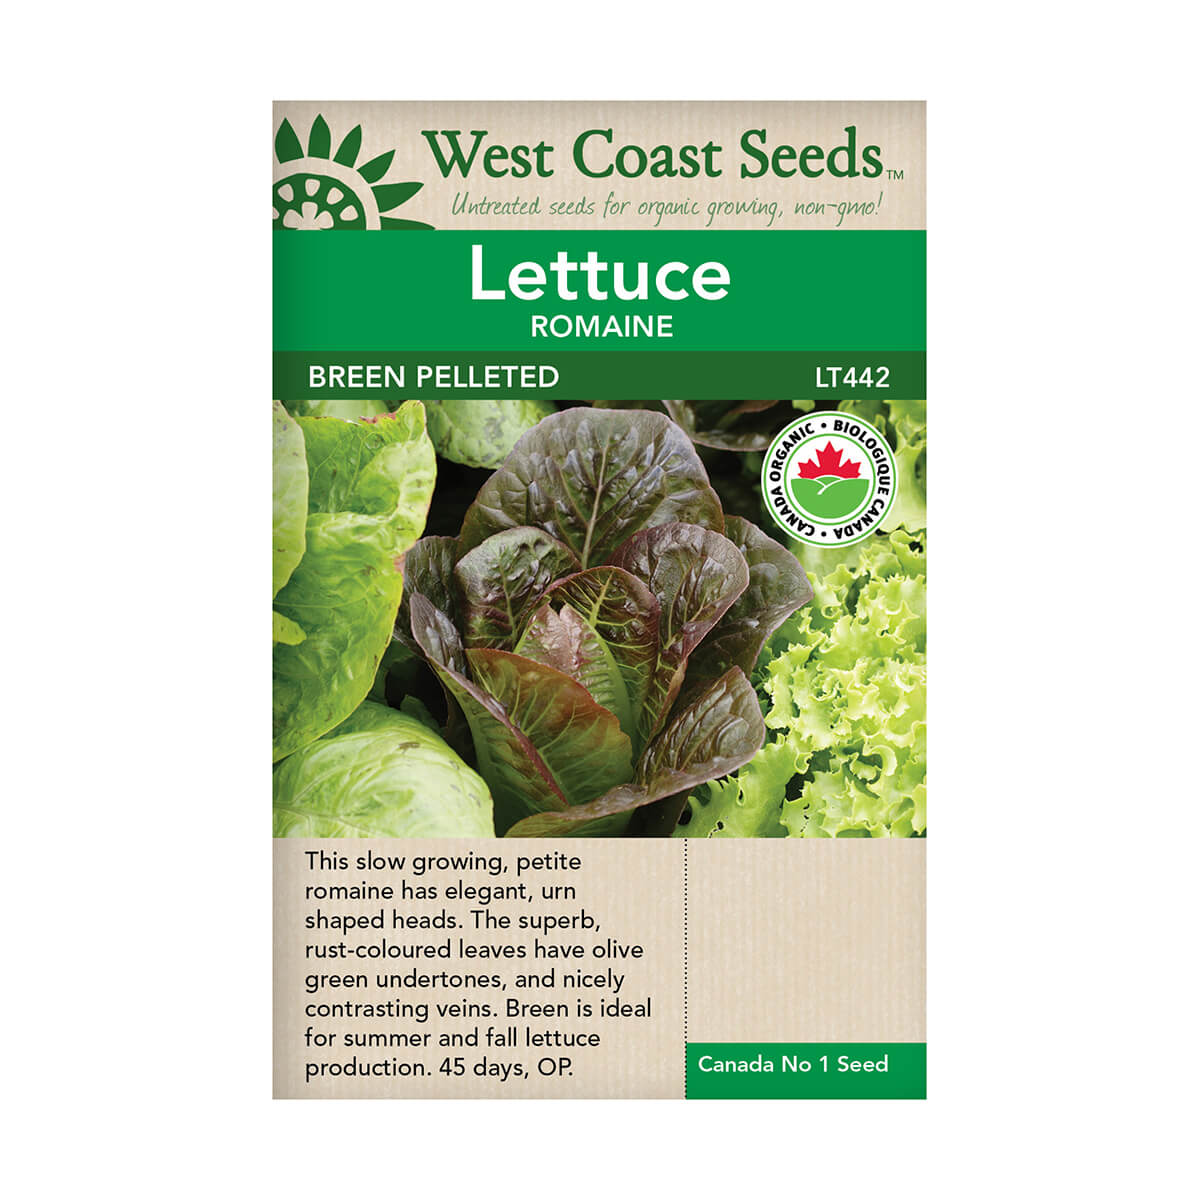 Breen Pelleted Organic Romaine Lettuce Seeds - approx. 50 seeds